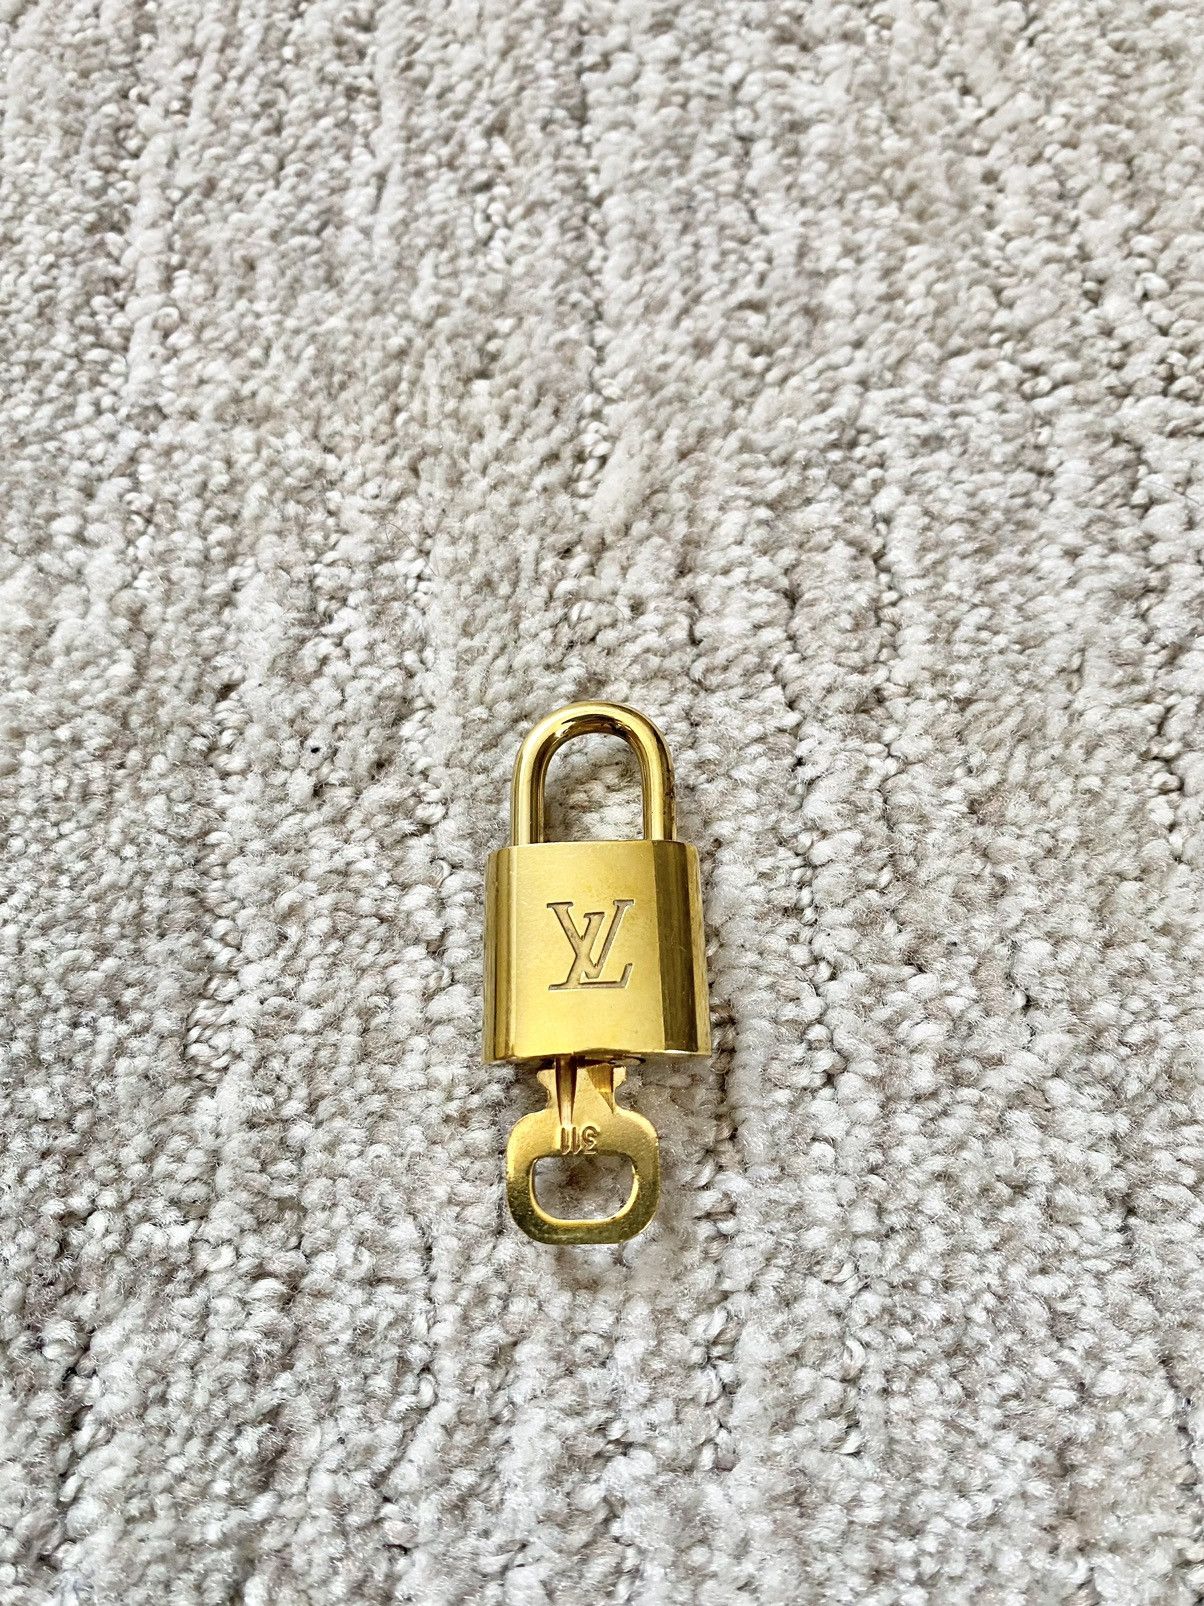 SOLD Authentic LV Lock and Key Set #311  Lock and key, Louis vuitton  accessories, Authentic louis vuitton